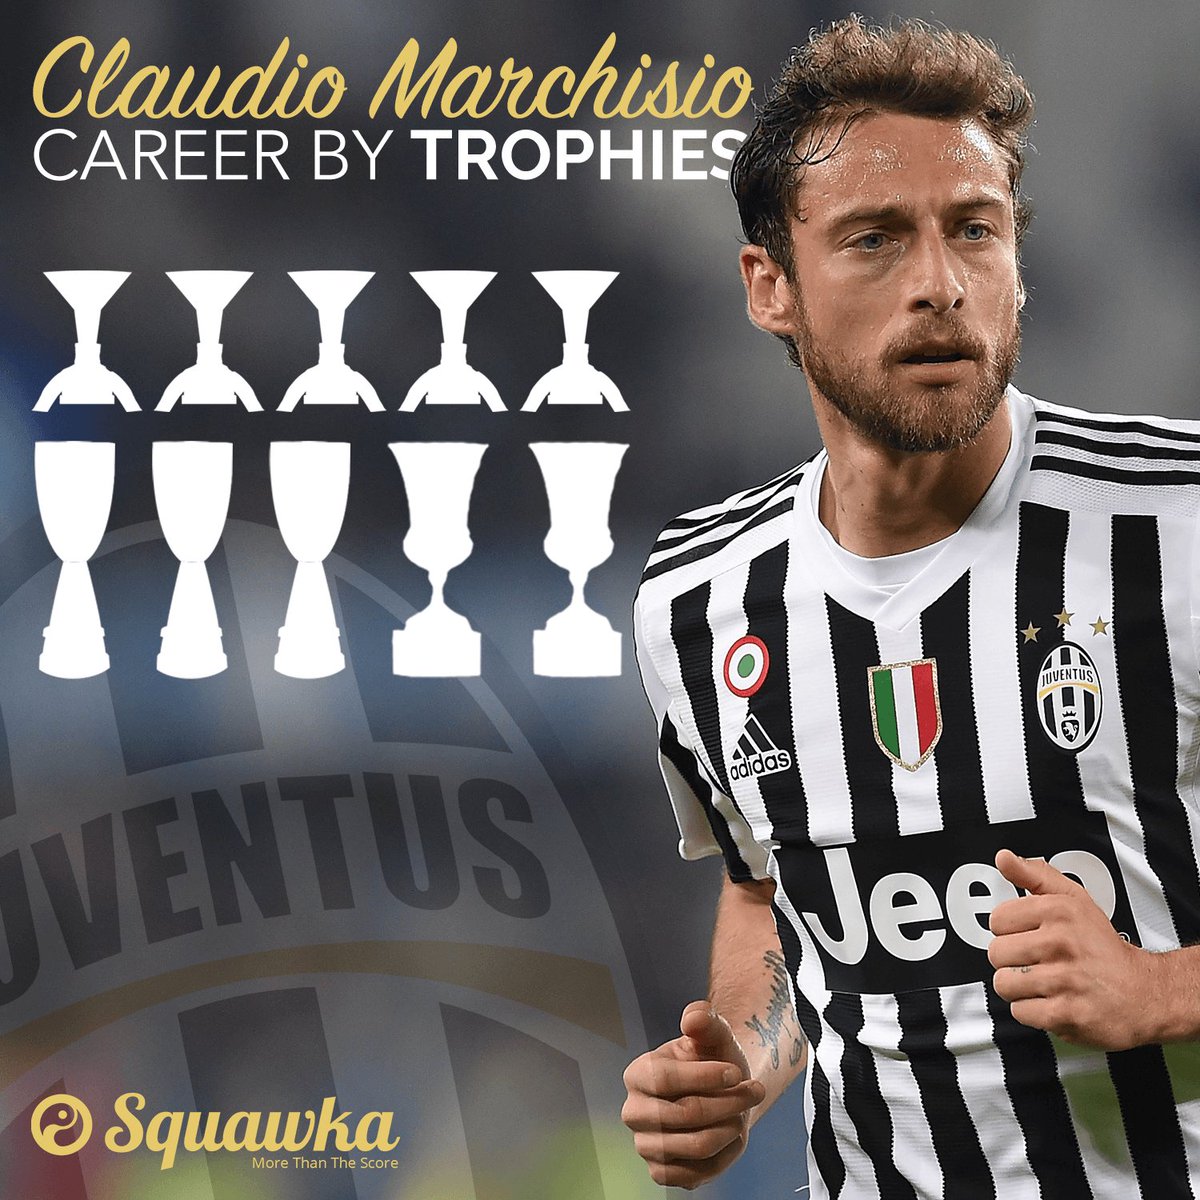 Image result for Claudio Marchisio with trophy